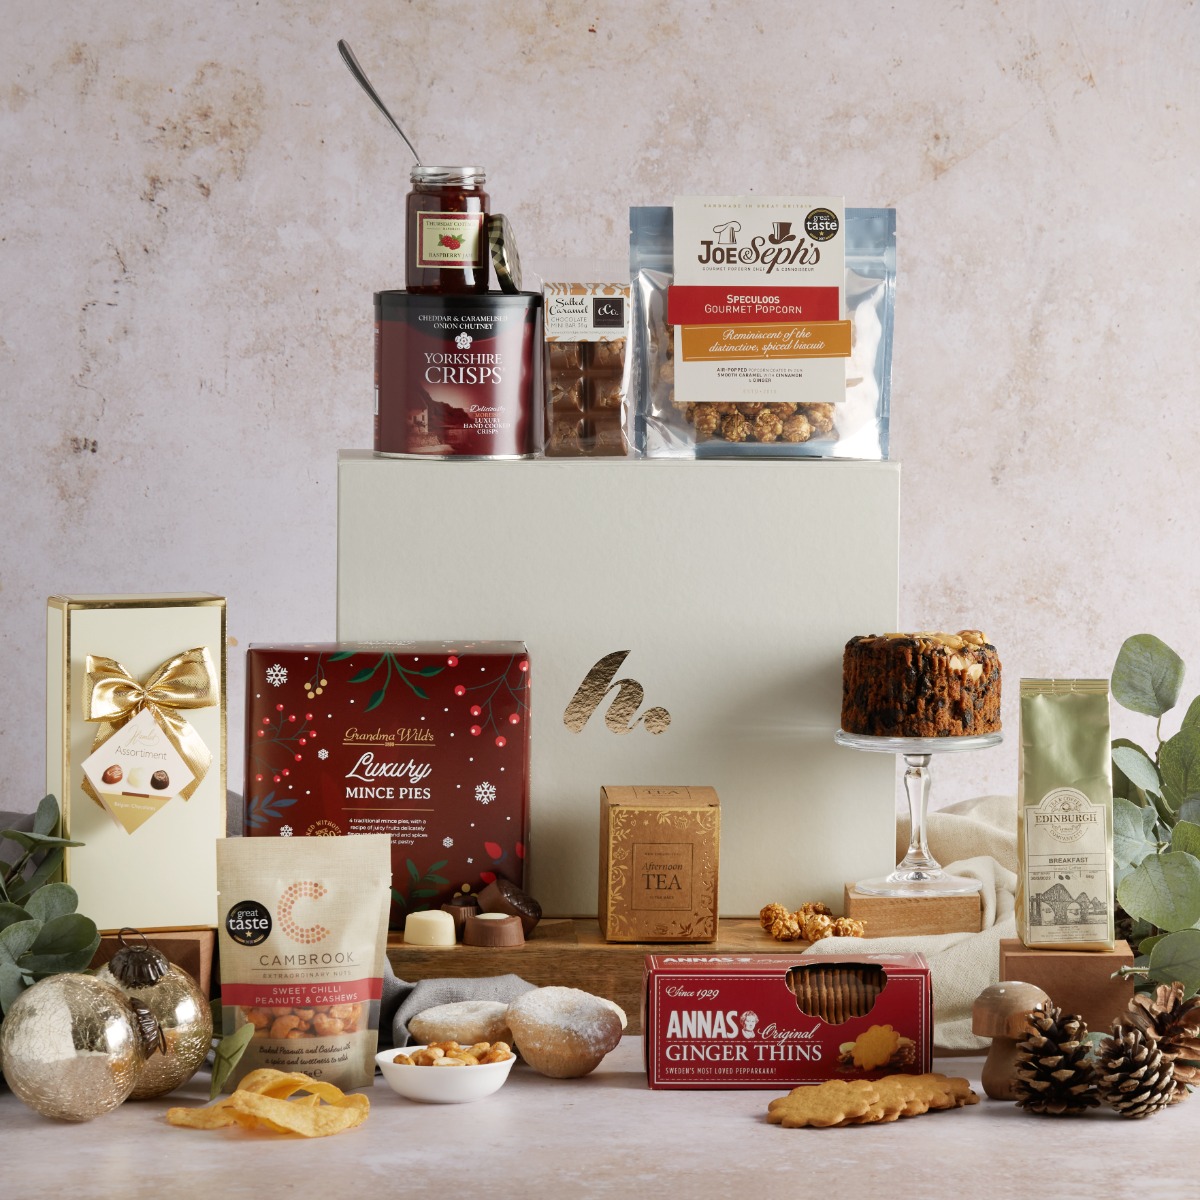 The Bearing Gifts Christmas hamper with contents on display